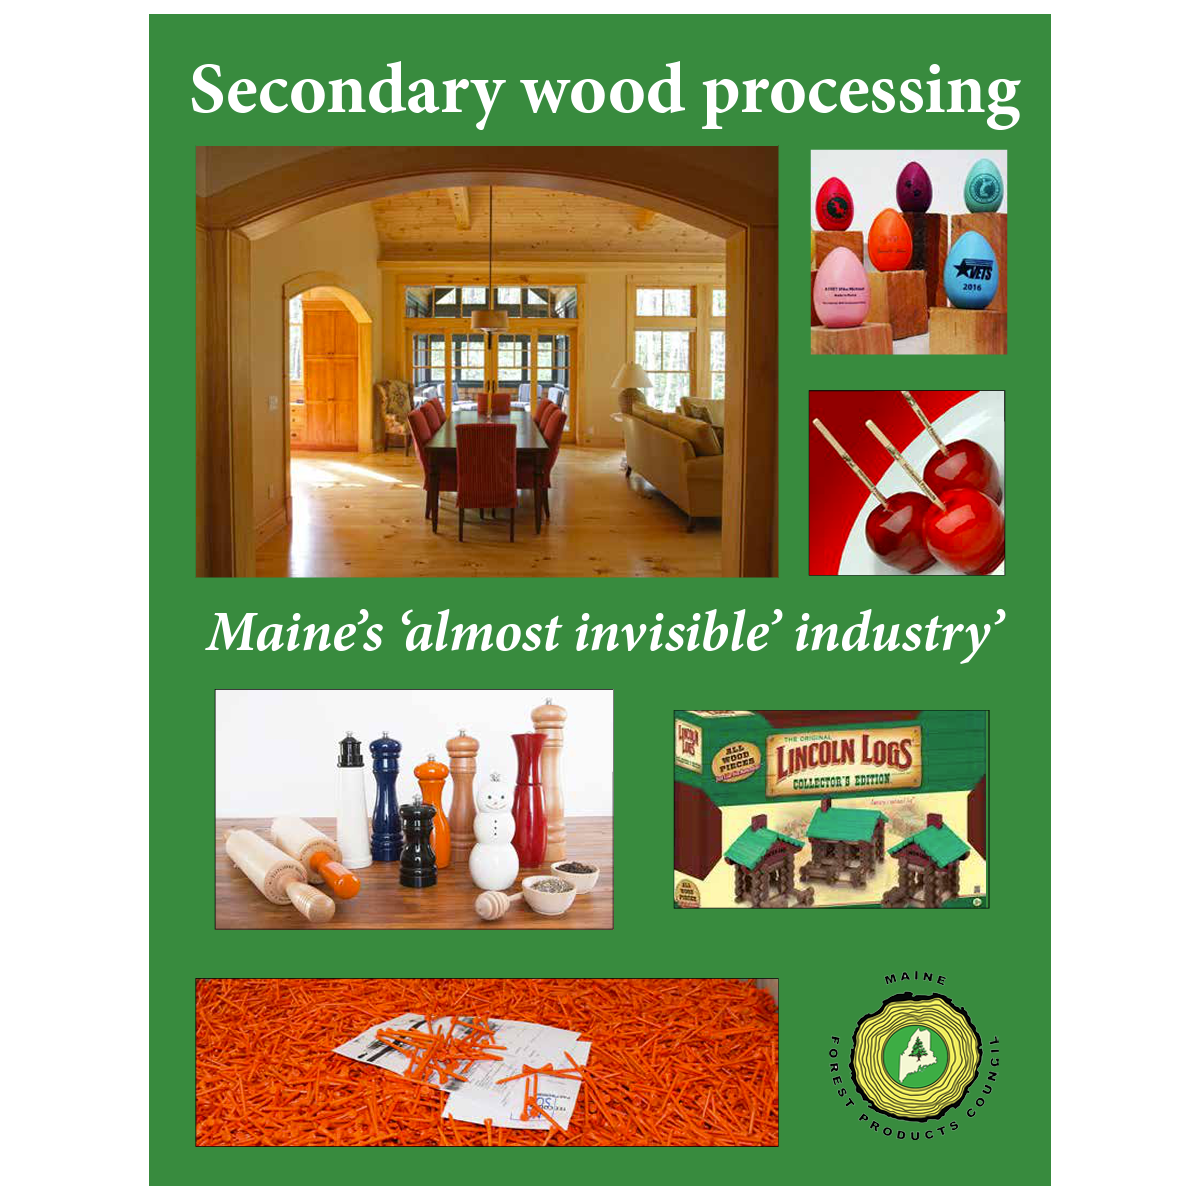 Secondary wood processing